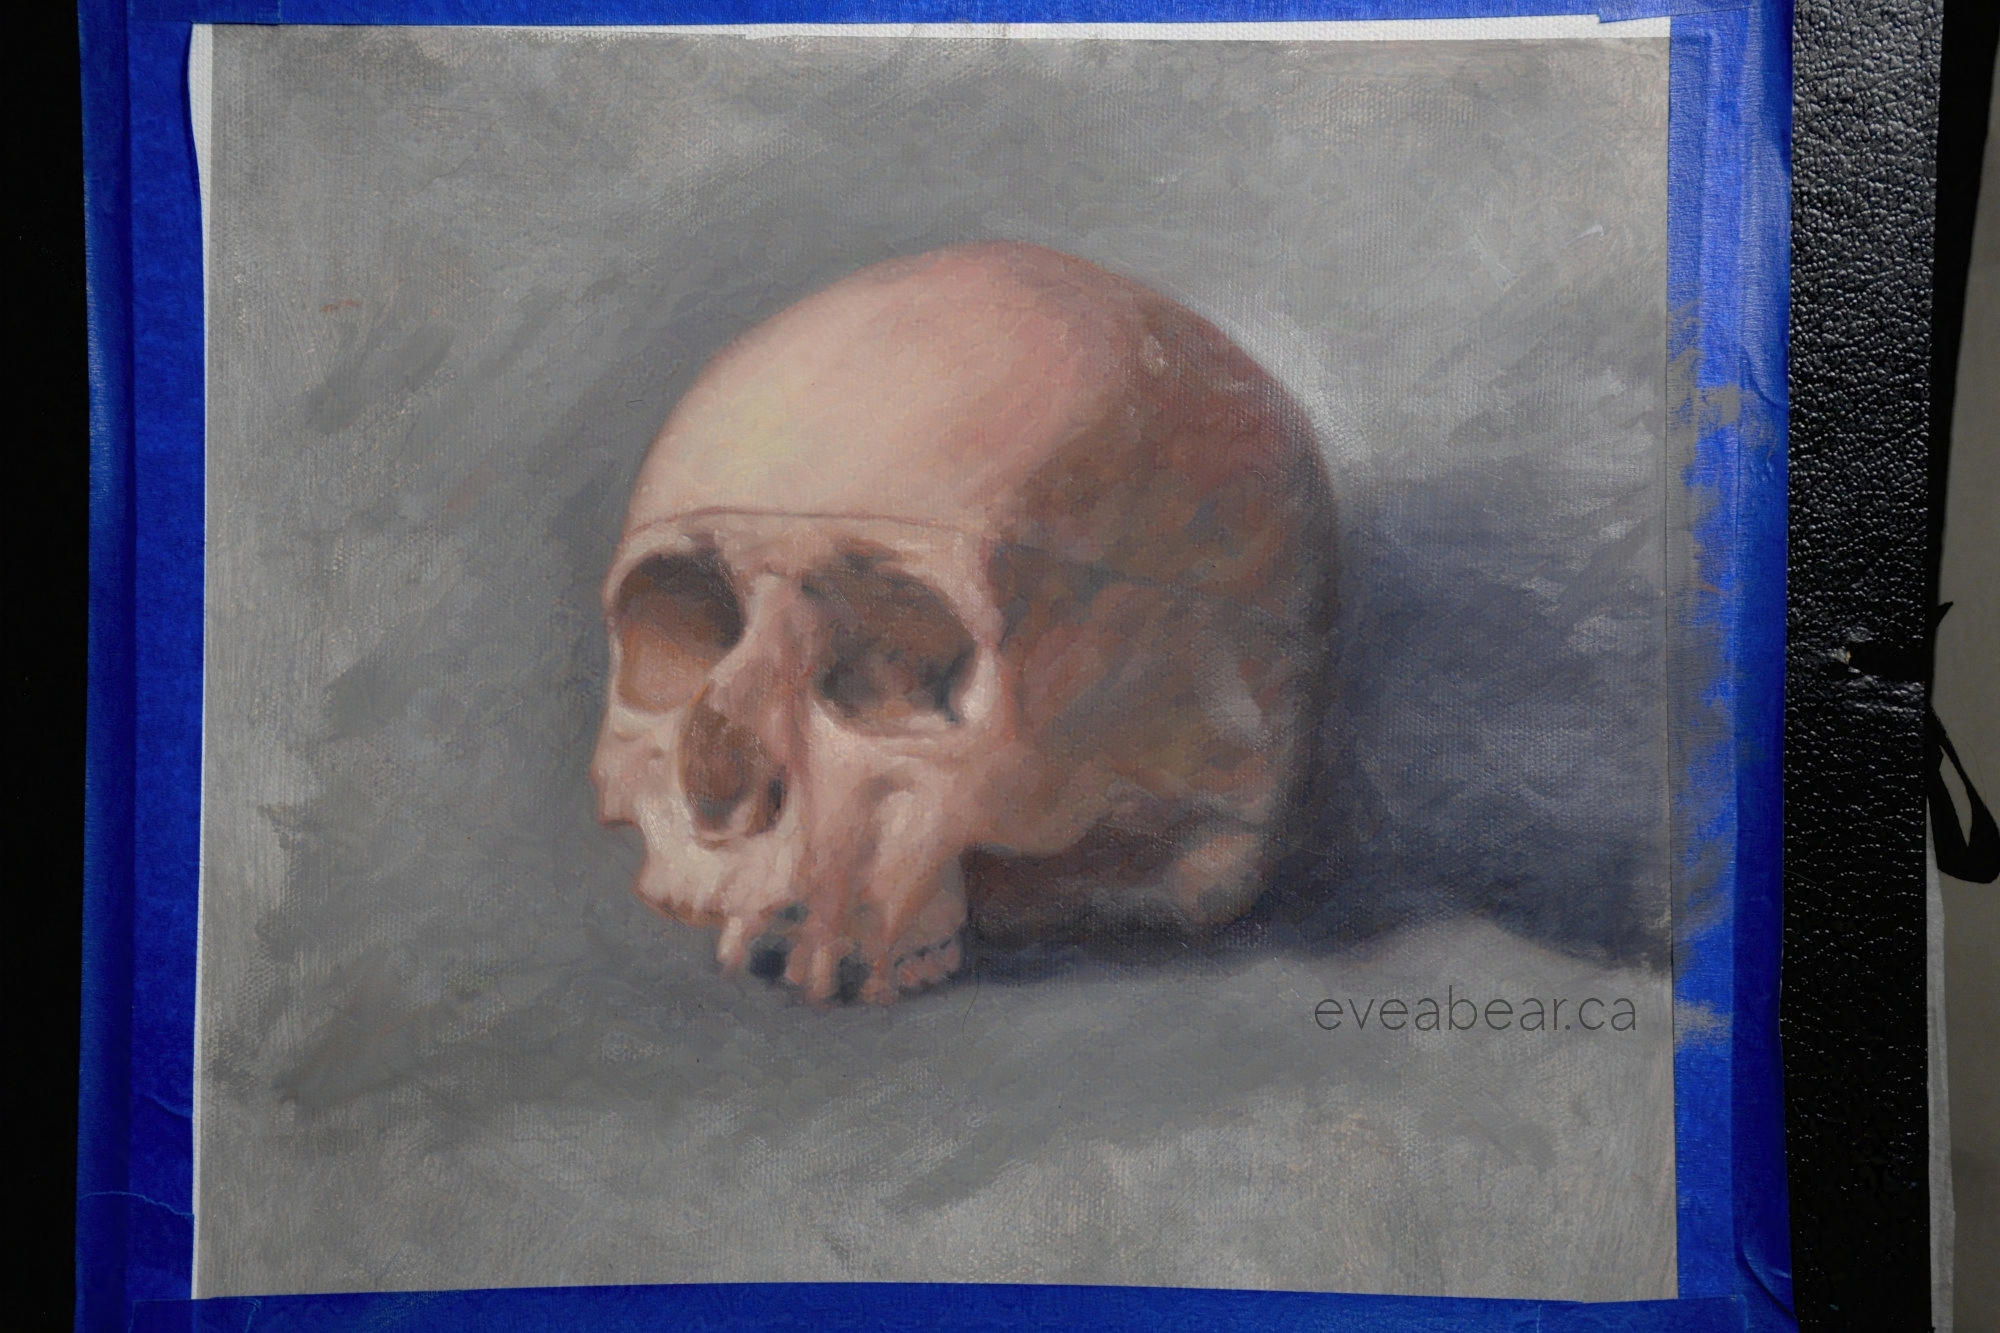 Skull from life, oil painting in 2 layers